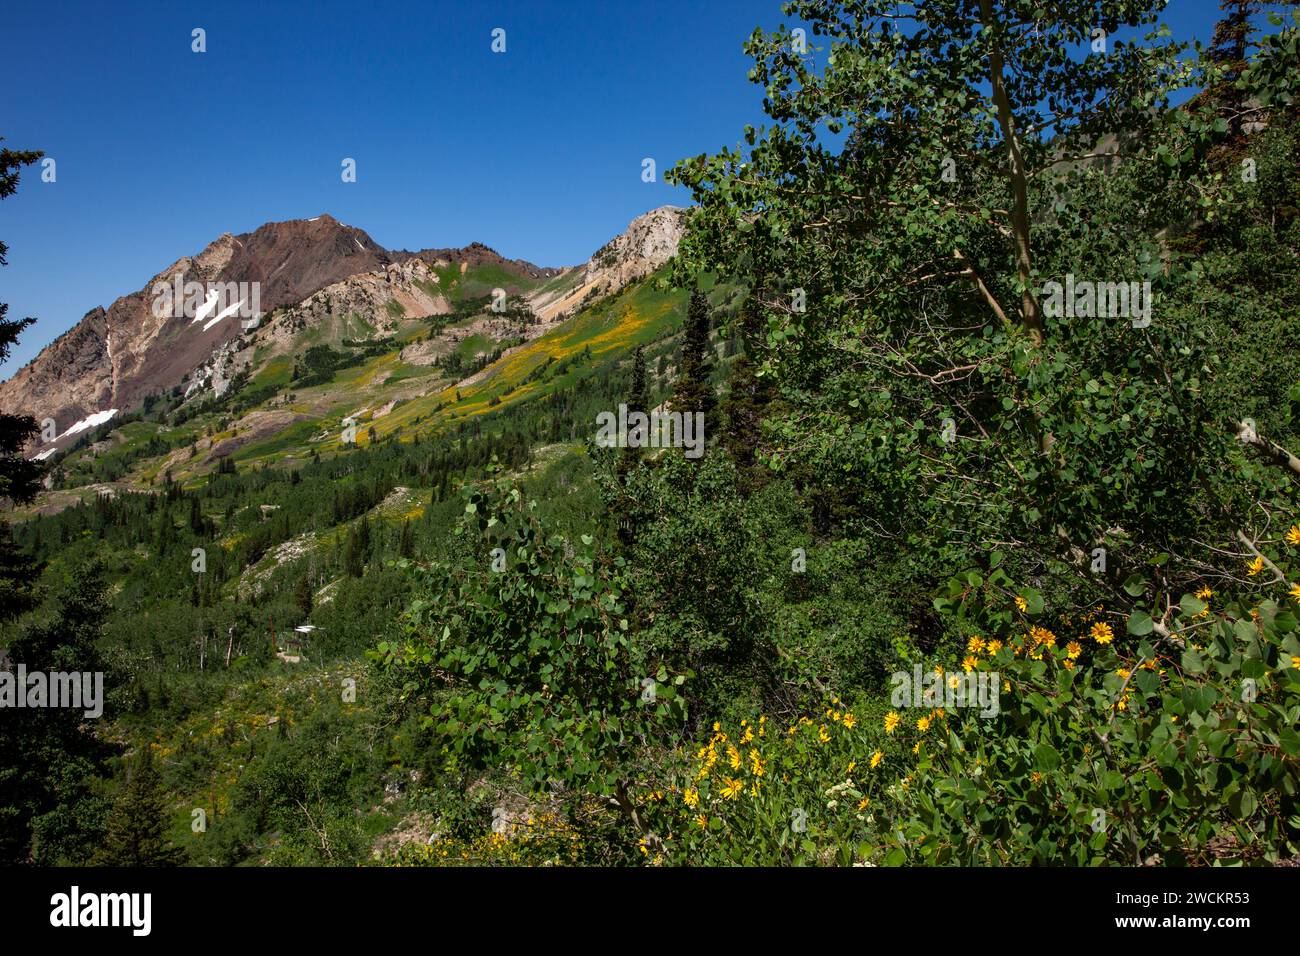 Summer wildflower bloom in Albion Basin in Little Cottonwood Canyon by Salt Lake City, Utah.  Mount Superior is behind. Stock Photo